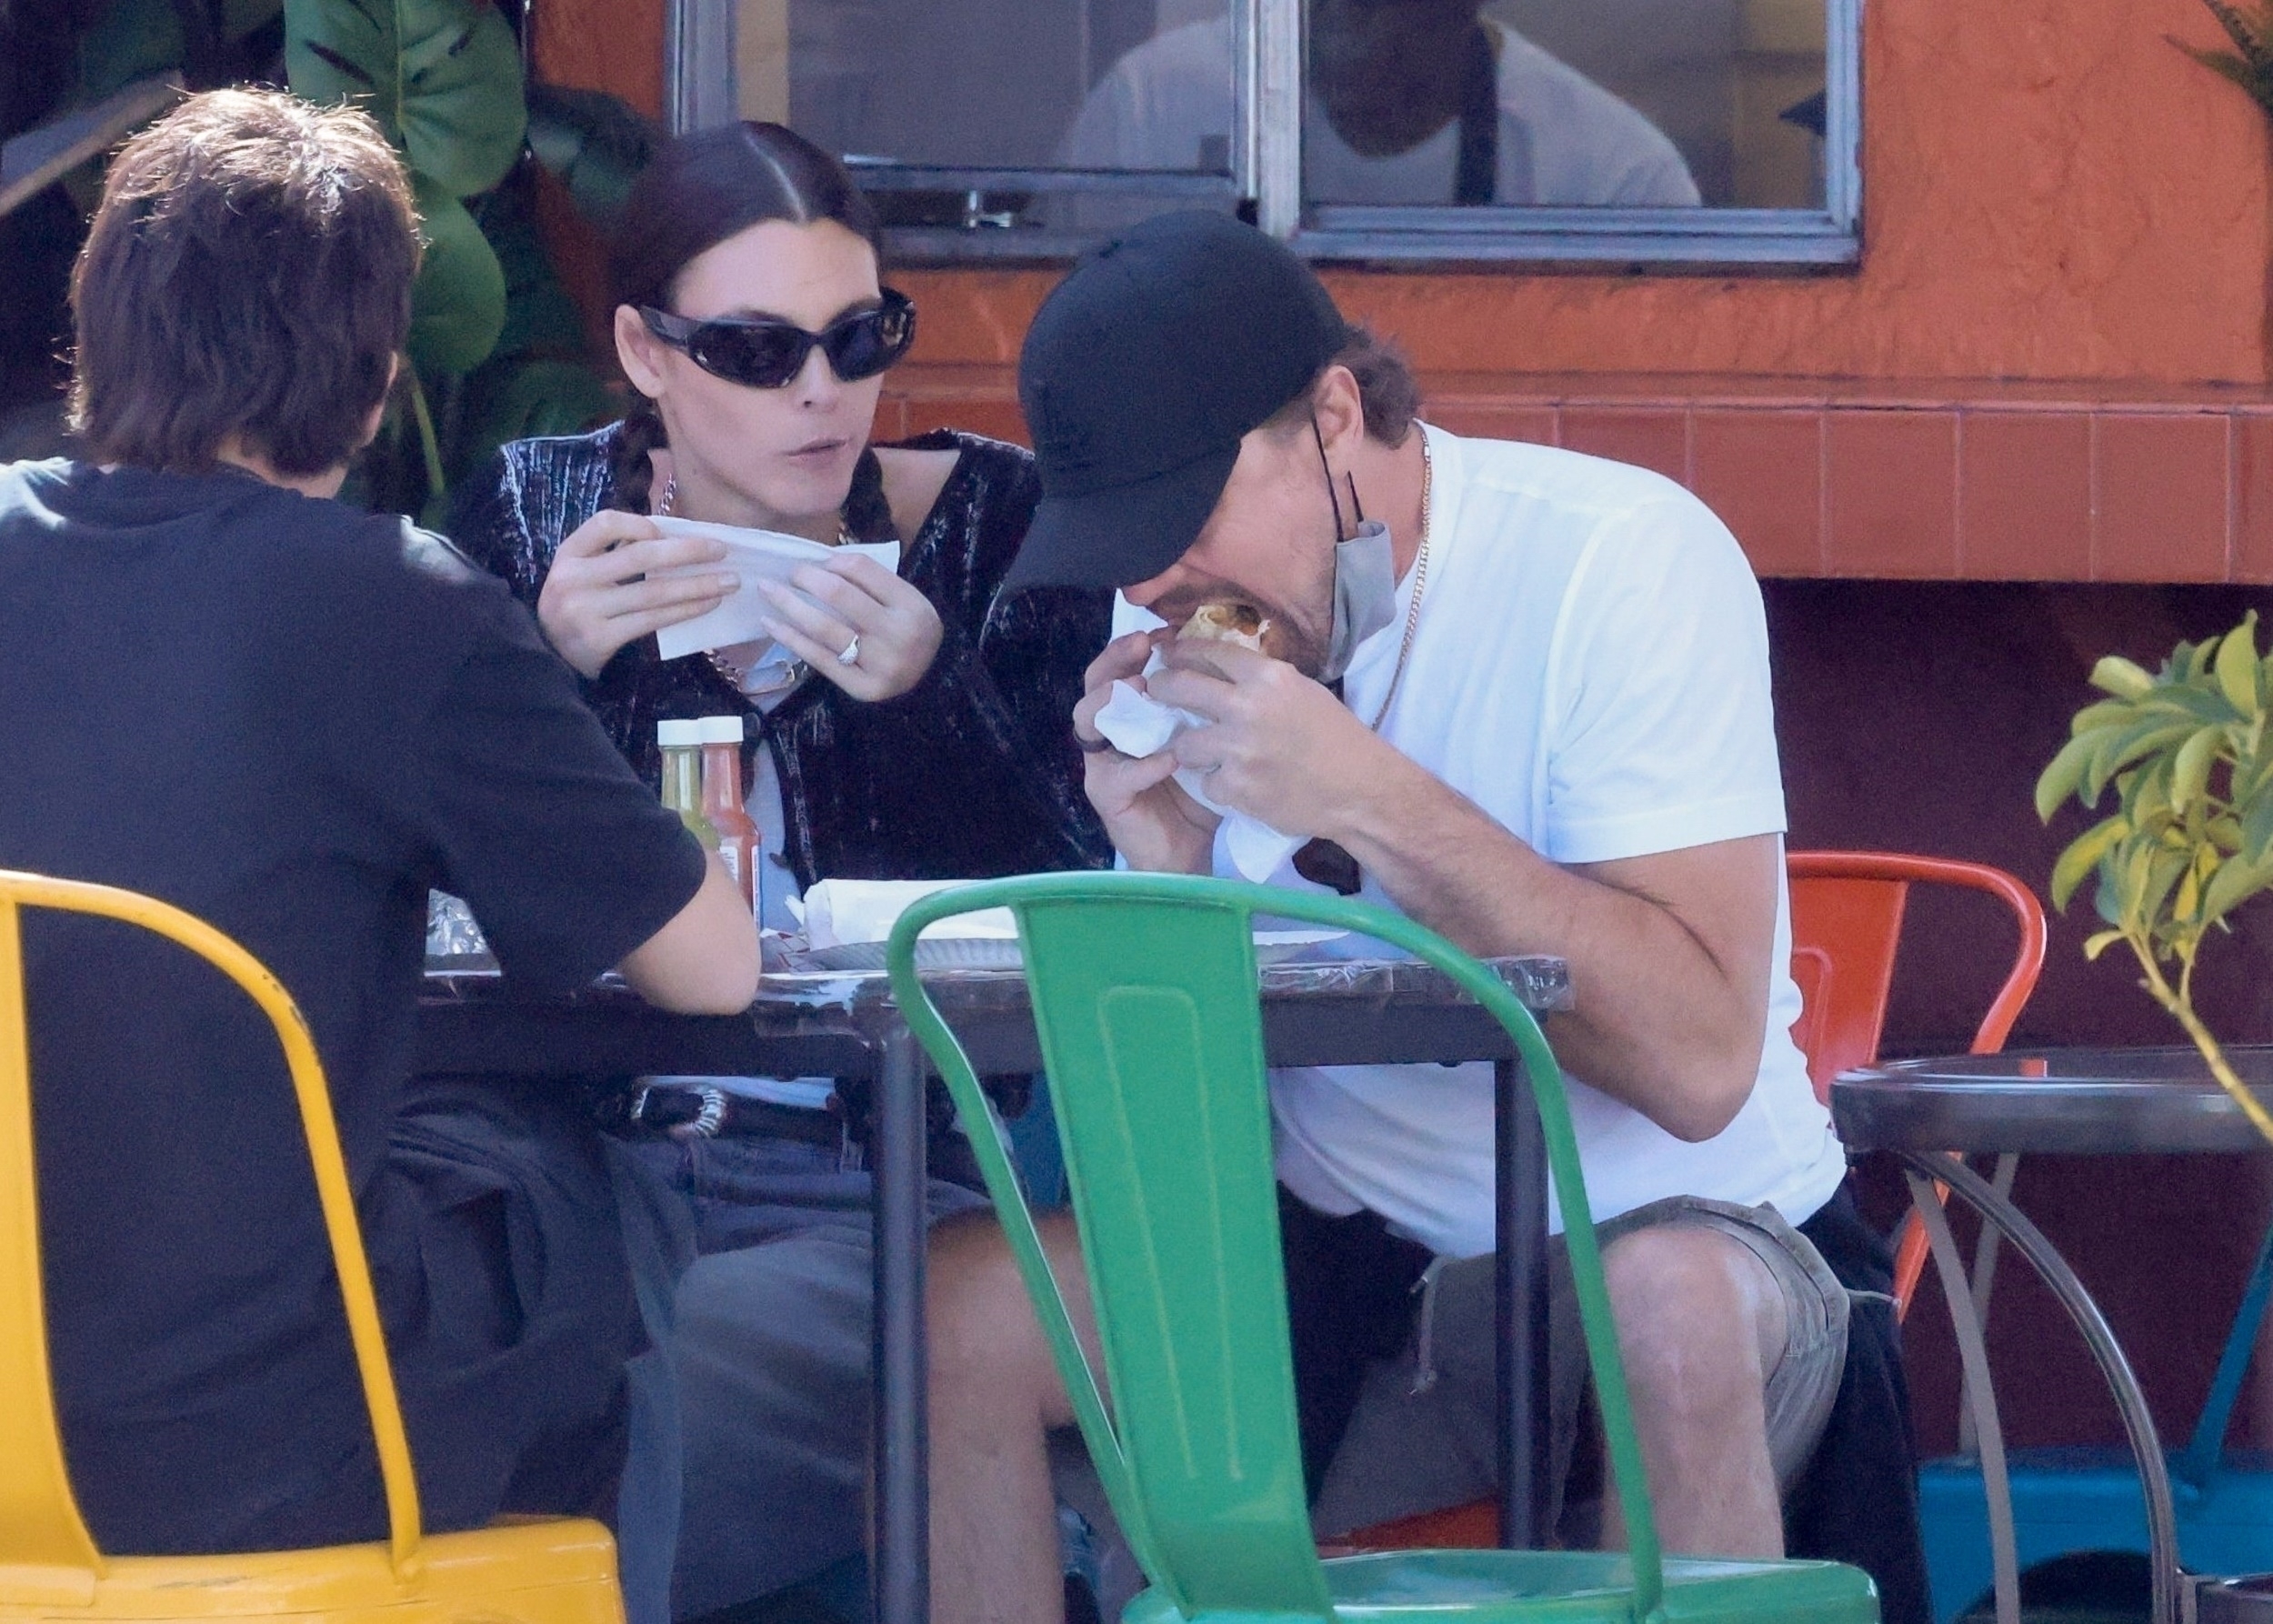 Vitorria and Leonardo sparked engagement rumors in March while out grabbing lunch